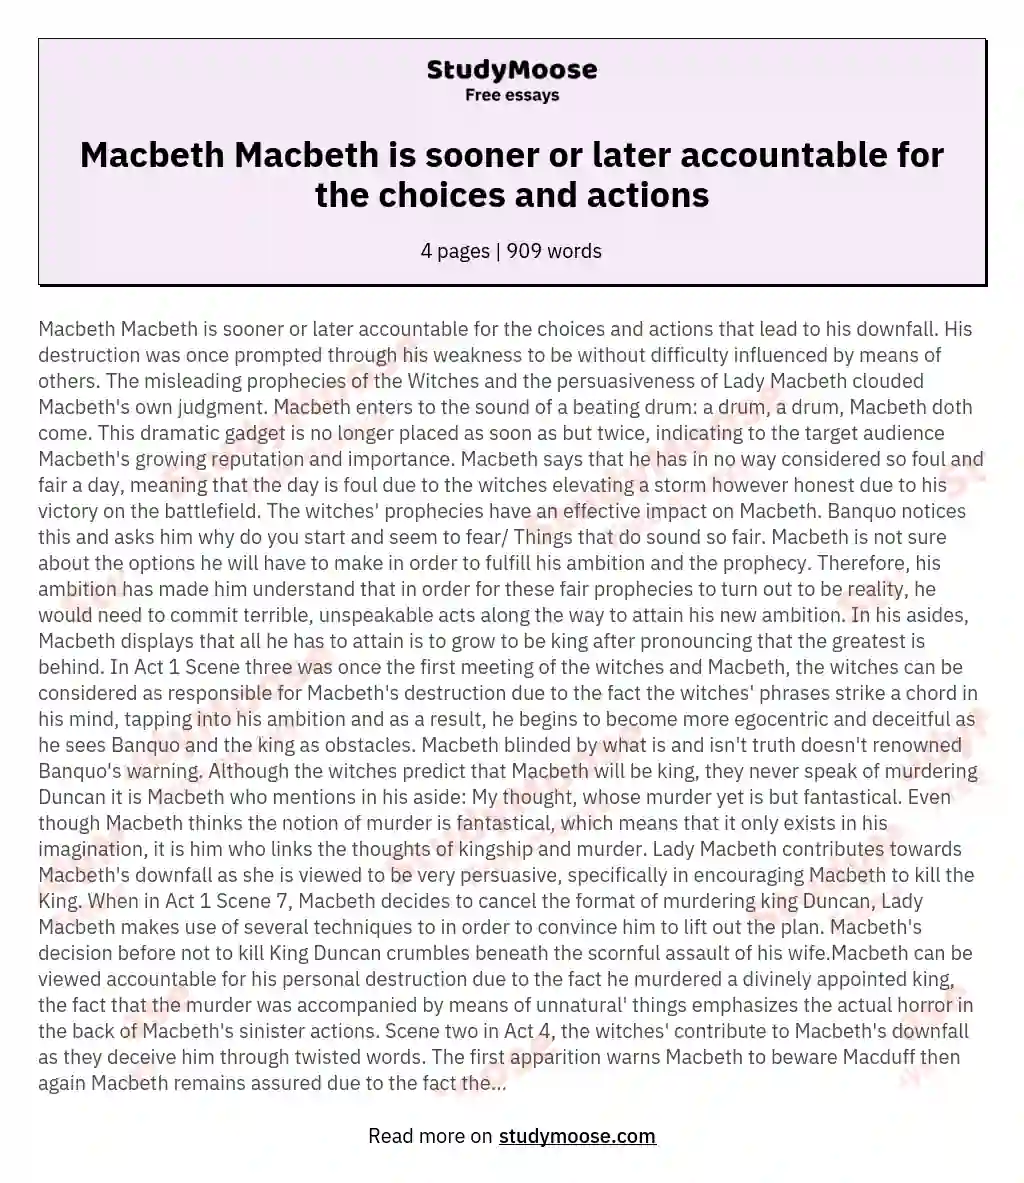 Macbeth Macbeth is sooner or later accountable for the choices and actions essay